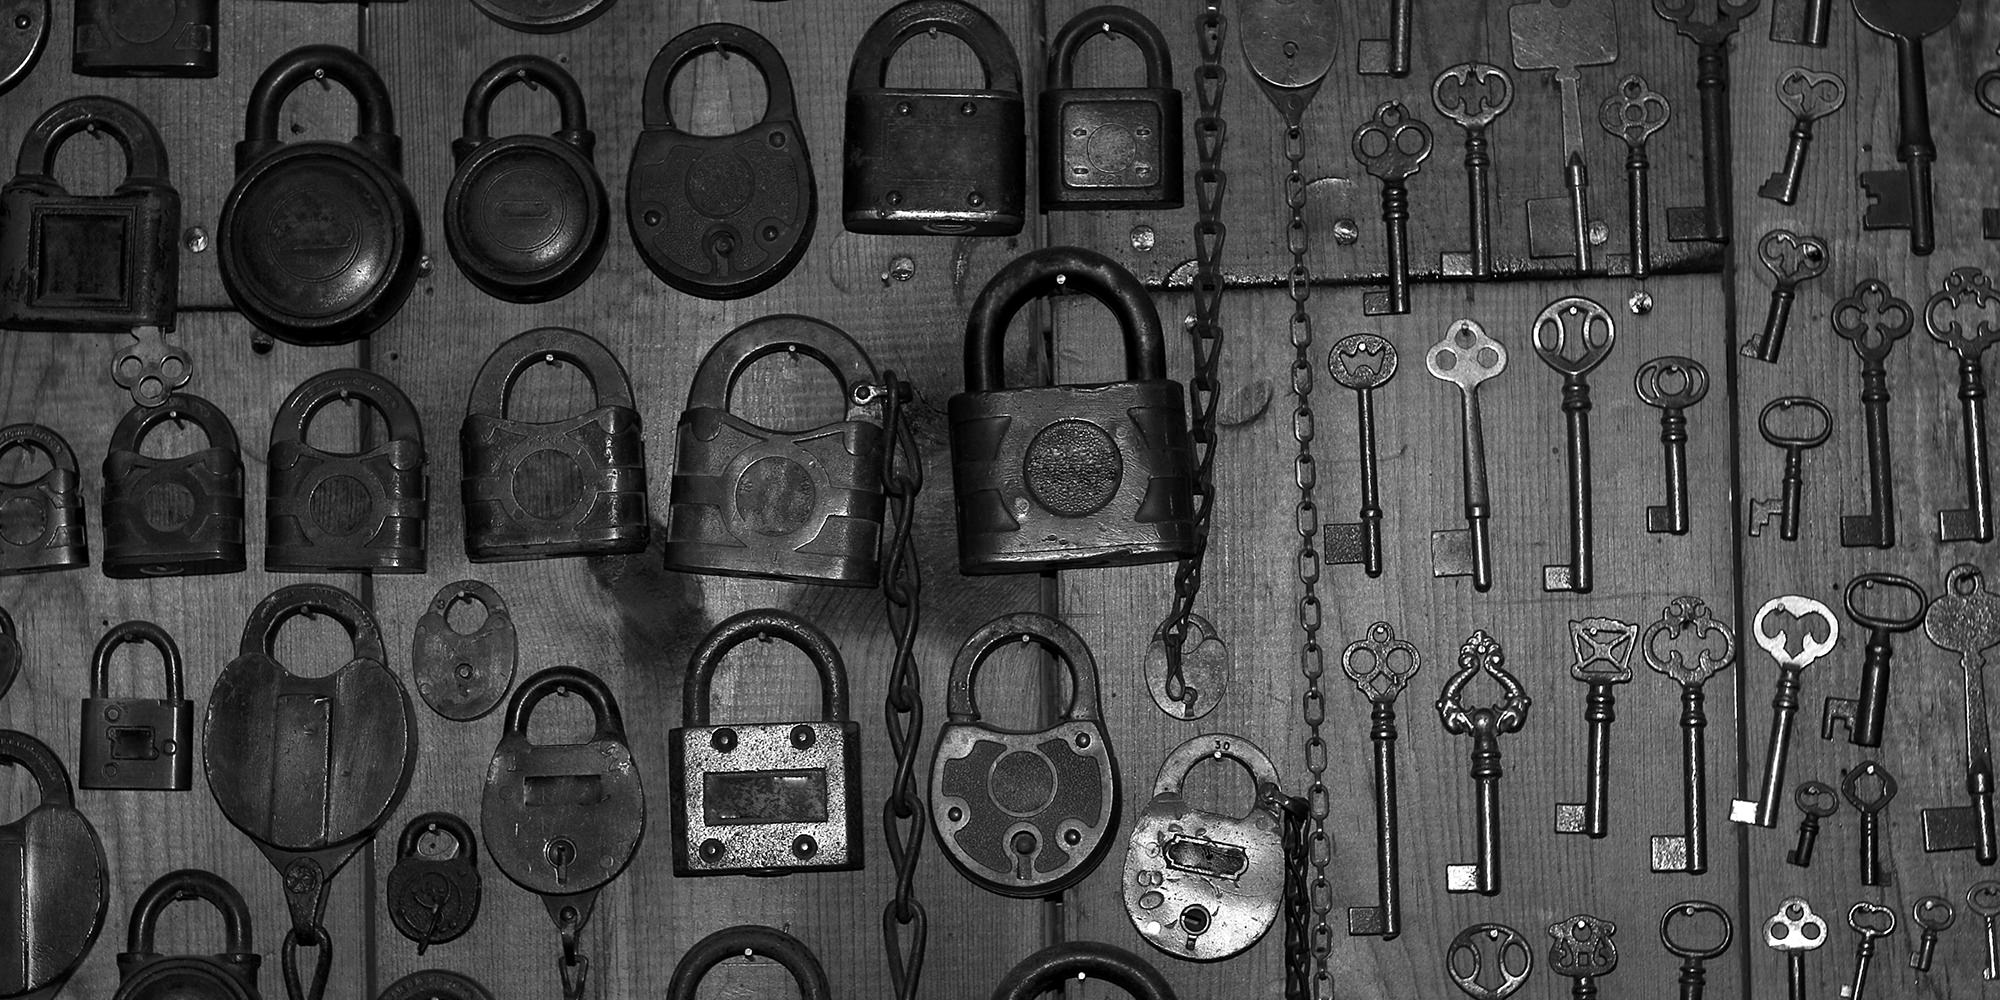 A whole bunch of old fashioned locks and keys.